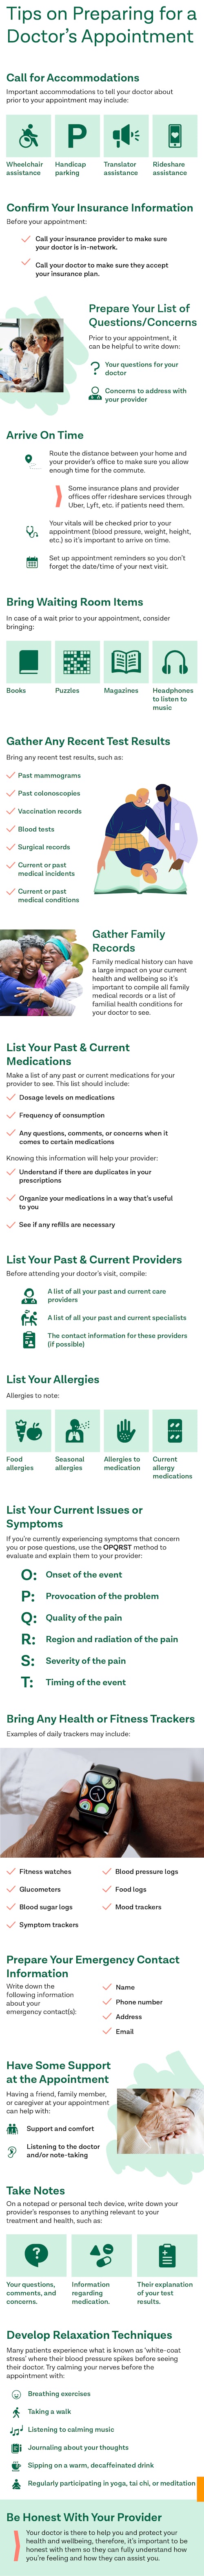 Infographic that breaks down different tips patients need to know before visiting with their doctor.